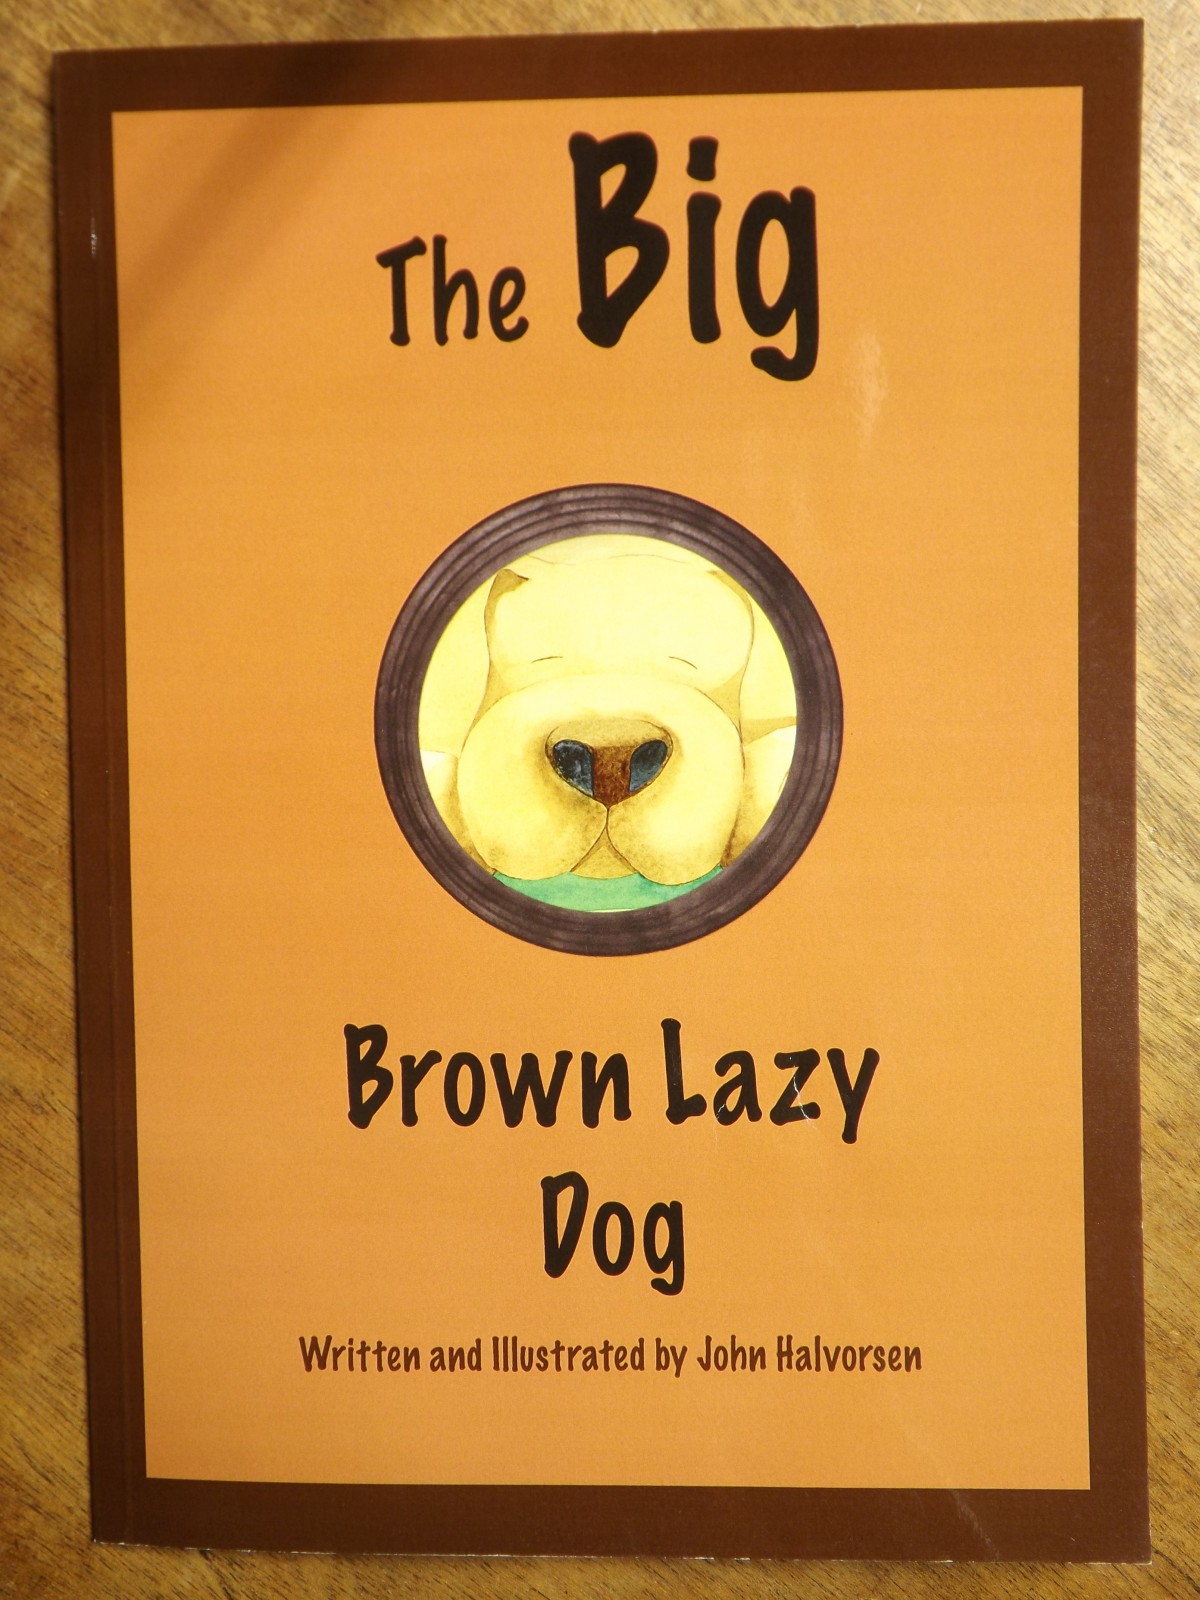 Book Feature: The Big Brown Lazy Dog